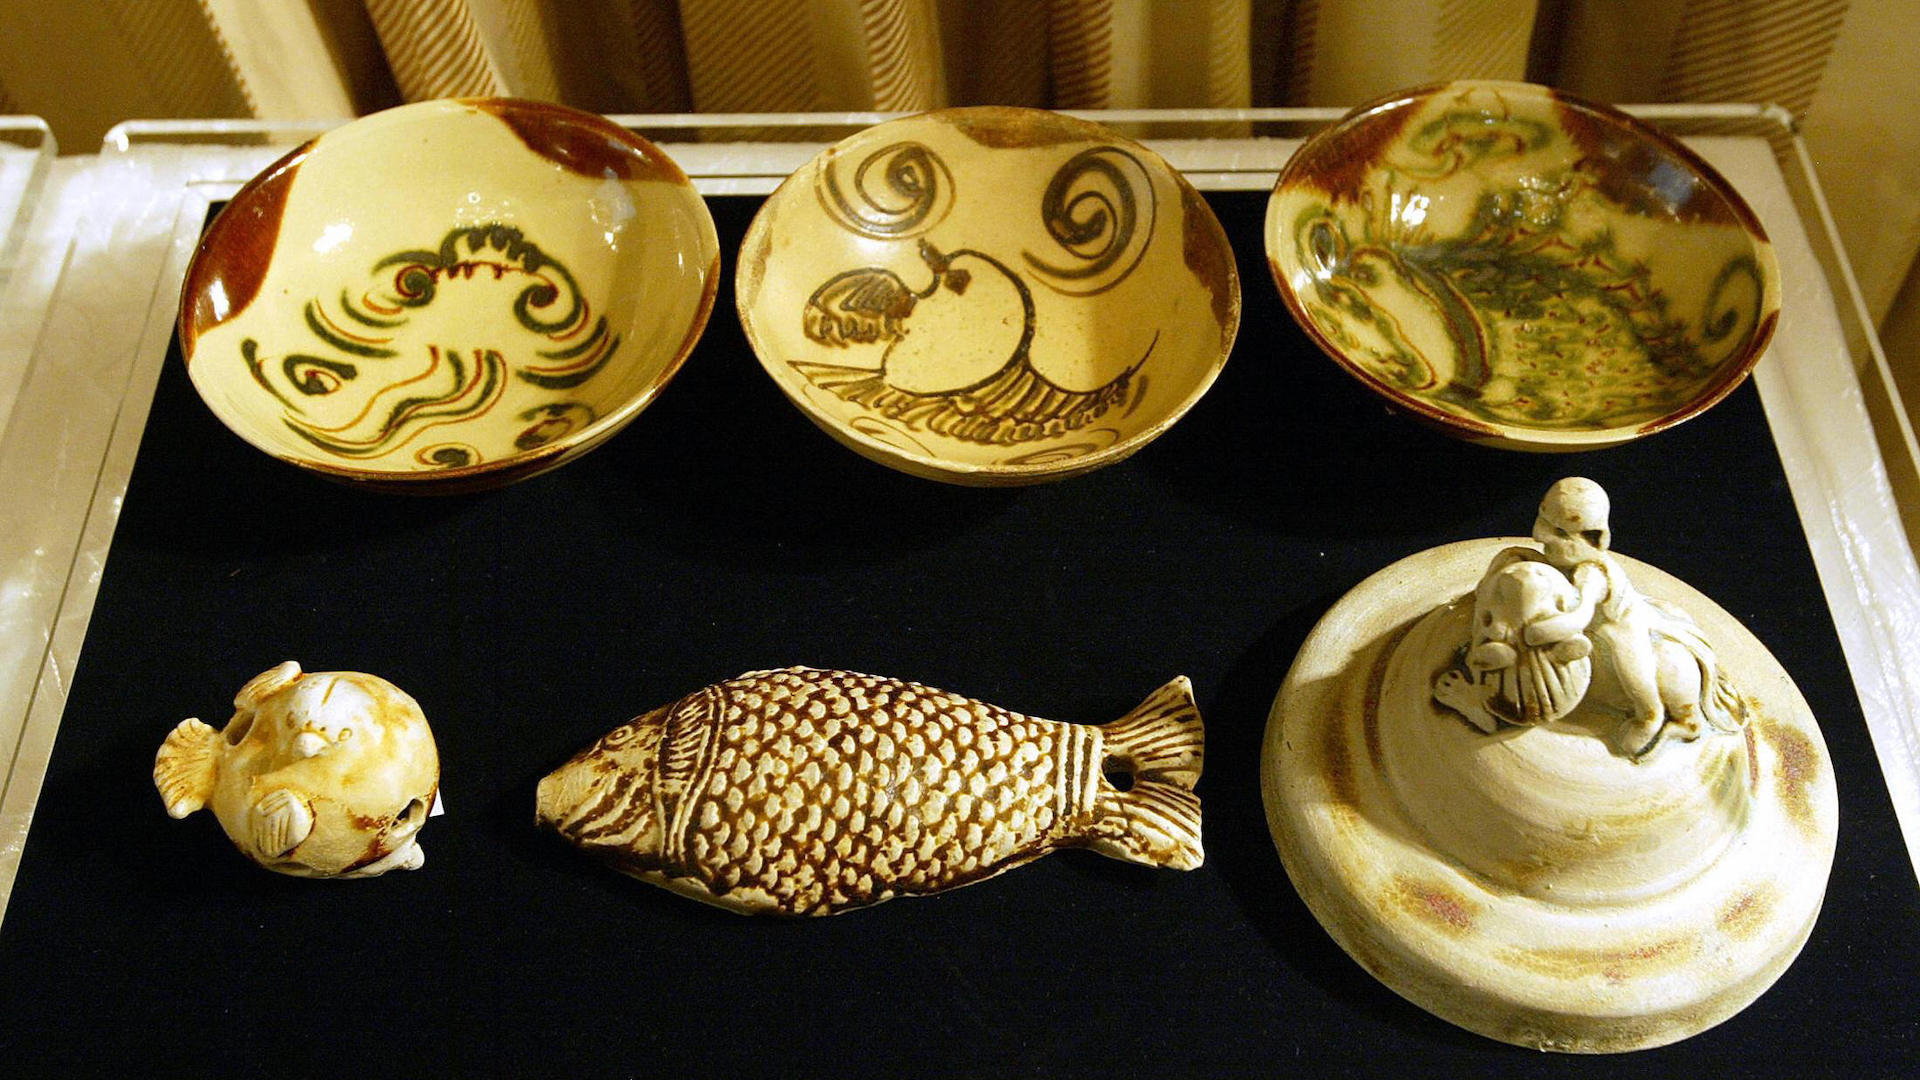 Rare ceramic items from a sunken shipment of Tang Dynasty treasures